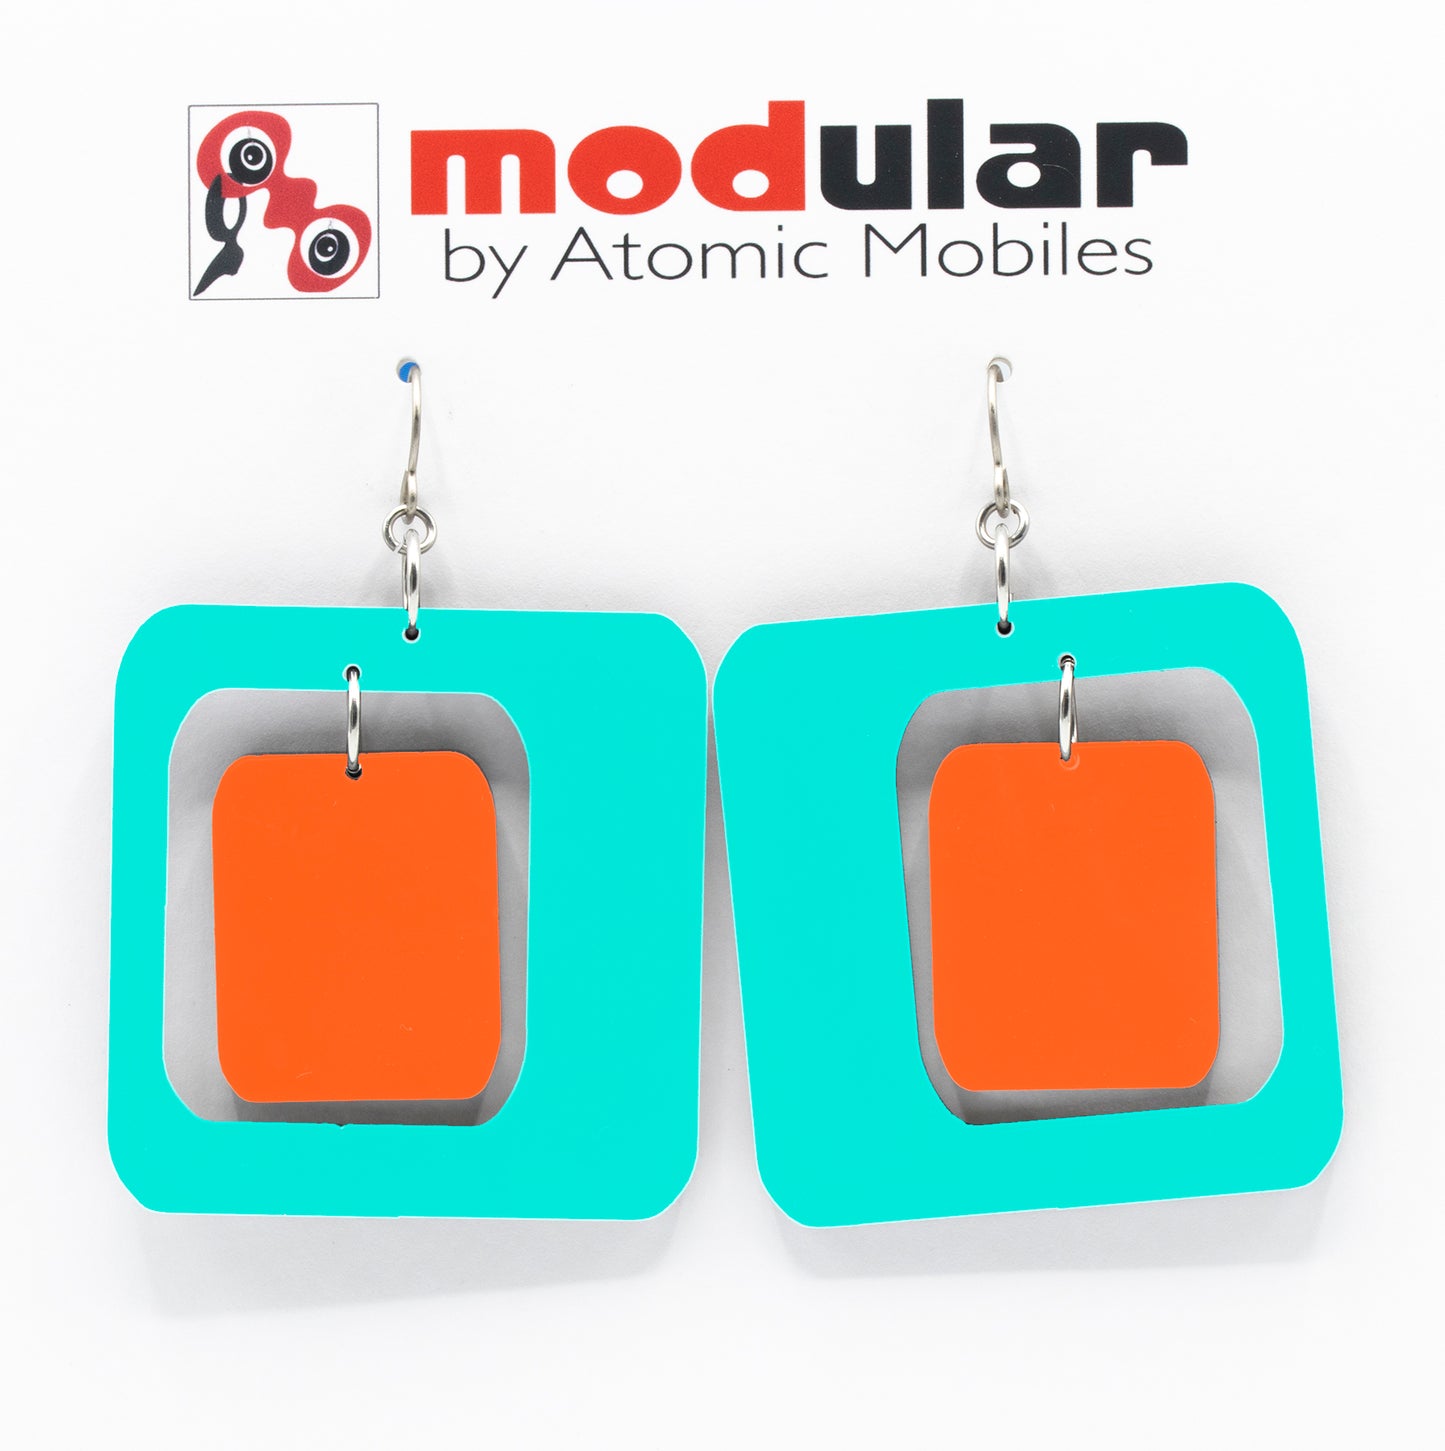 MODular Earrings - Coolsville Statement Earrings in Aqua and Orange by AtomicMobiles.com - retro era inspired mod handmade jewelry